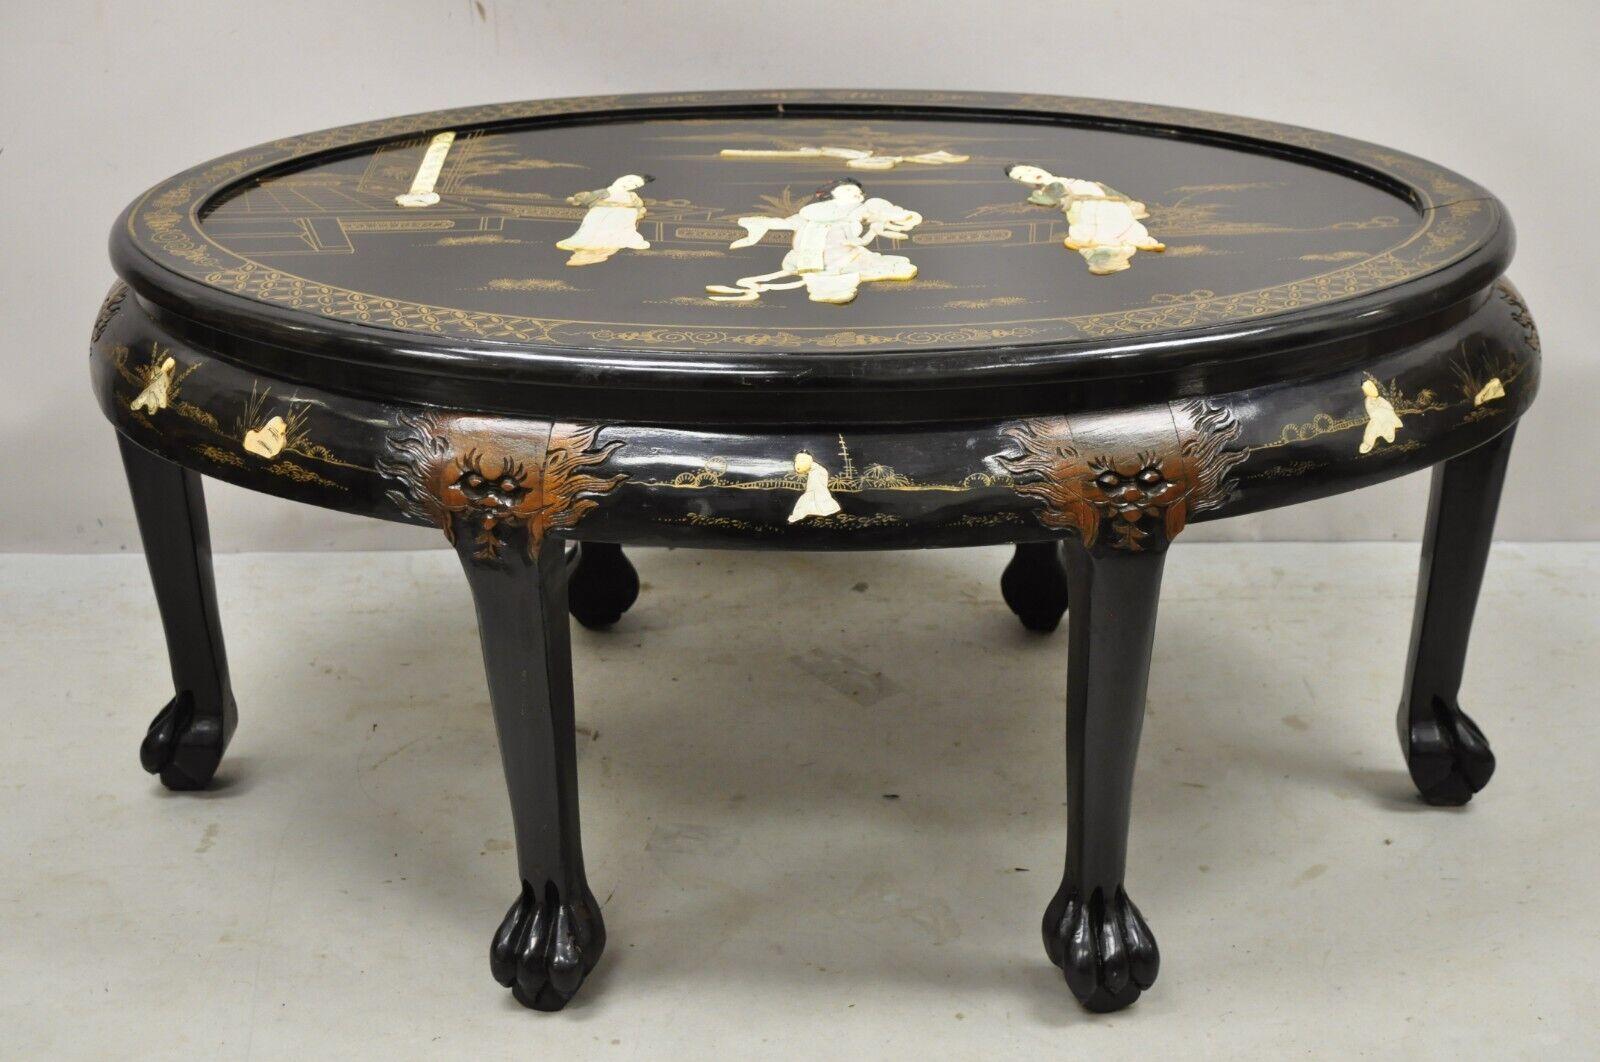 Vintage Chinese black lacquer mother of pearl oval nesting coffee table set 6 stools - B. Item features custom oval glass top, black lacquer finish, mother of pearl figural inlay throughout, very nice vintage set, great style and form, listing